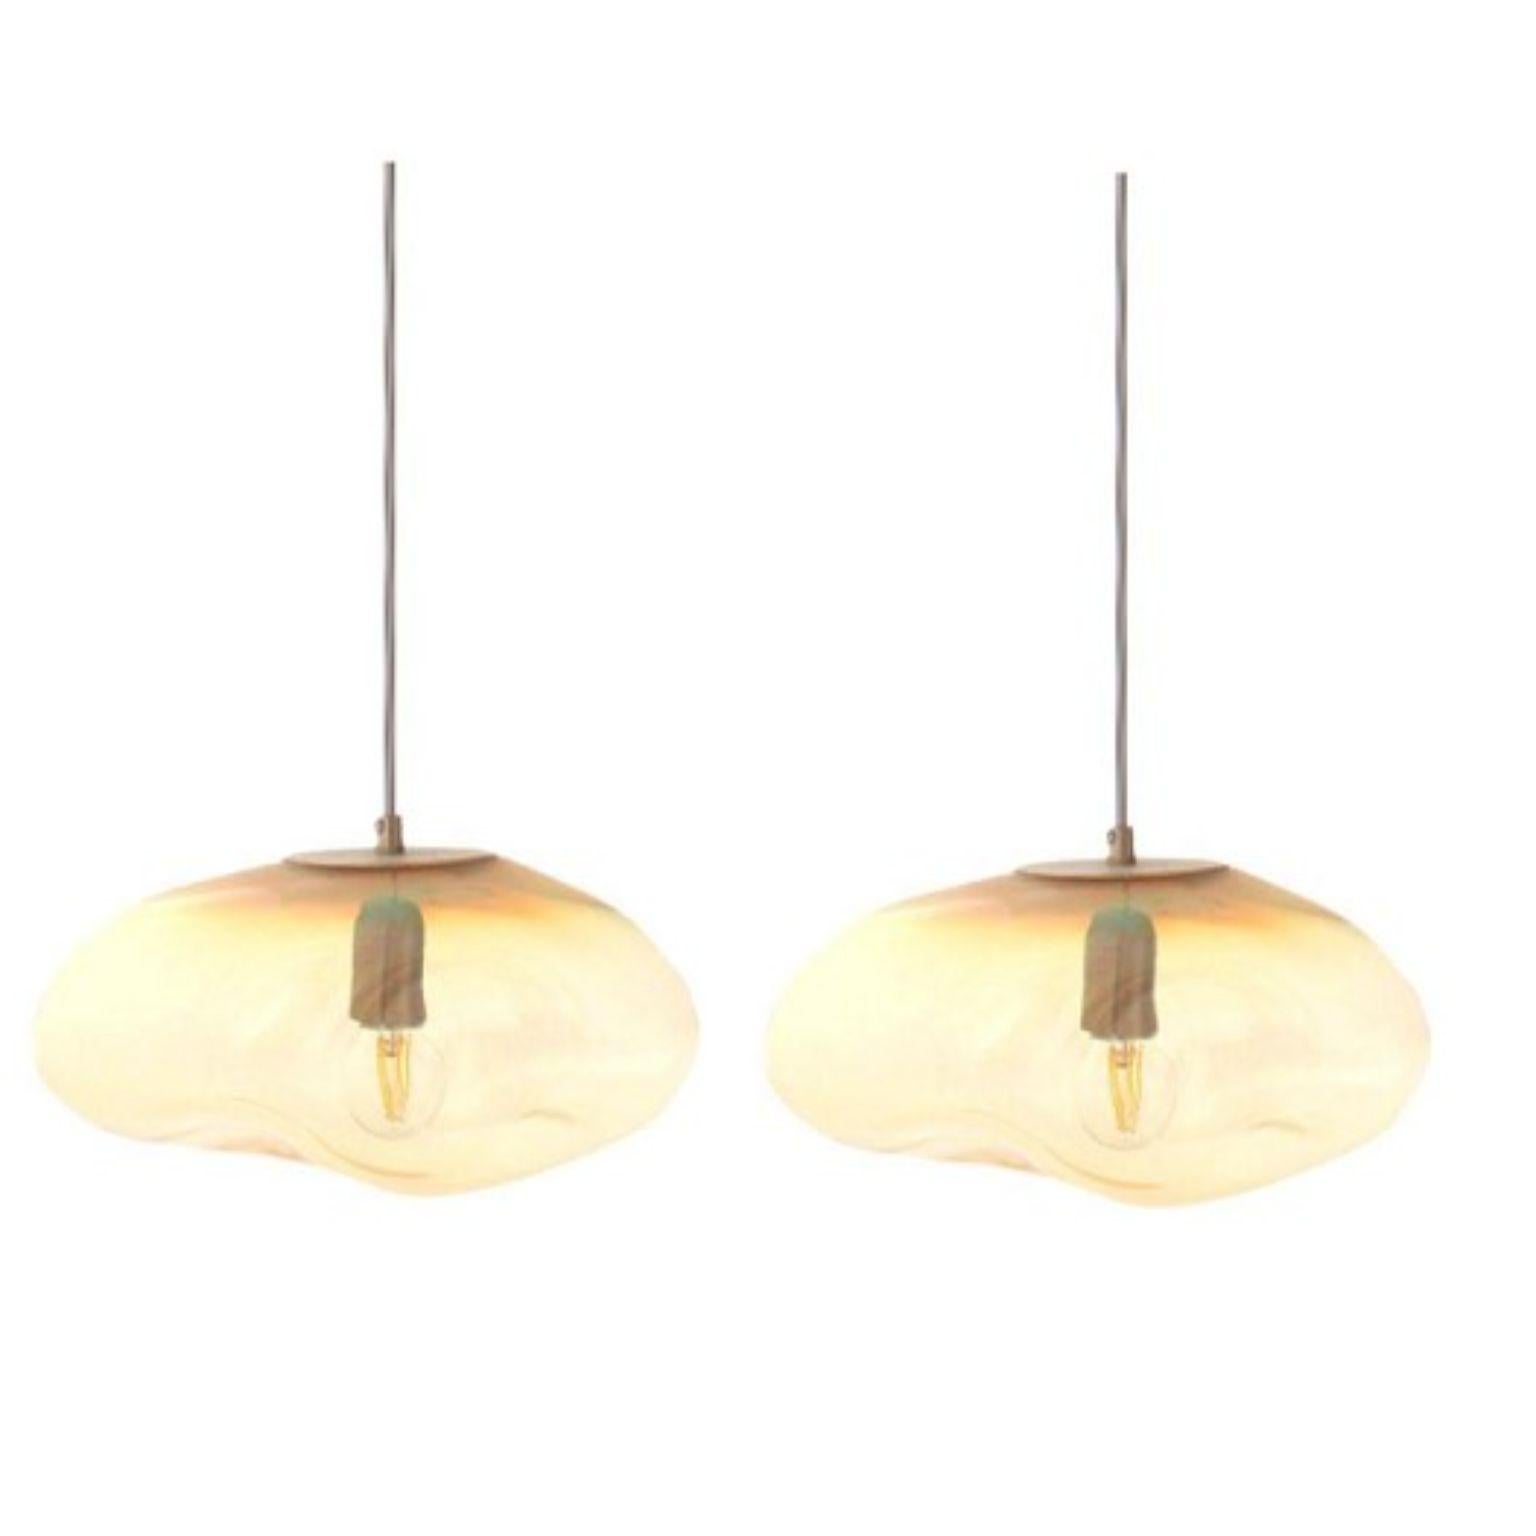 Set of 2 Planetoide Airisi Amber Iridescent Pendants by Eloa.
No UL listed 
Material: Glass,Steel,Silver, LED Bulb
Dimensions: D30 x W30 x H250 cm
Also Available in different colours and dimensions.

All our lamps can be wired according to each